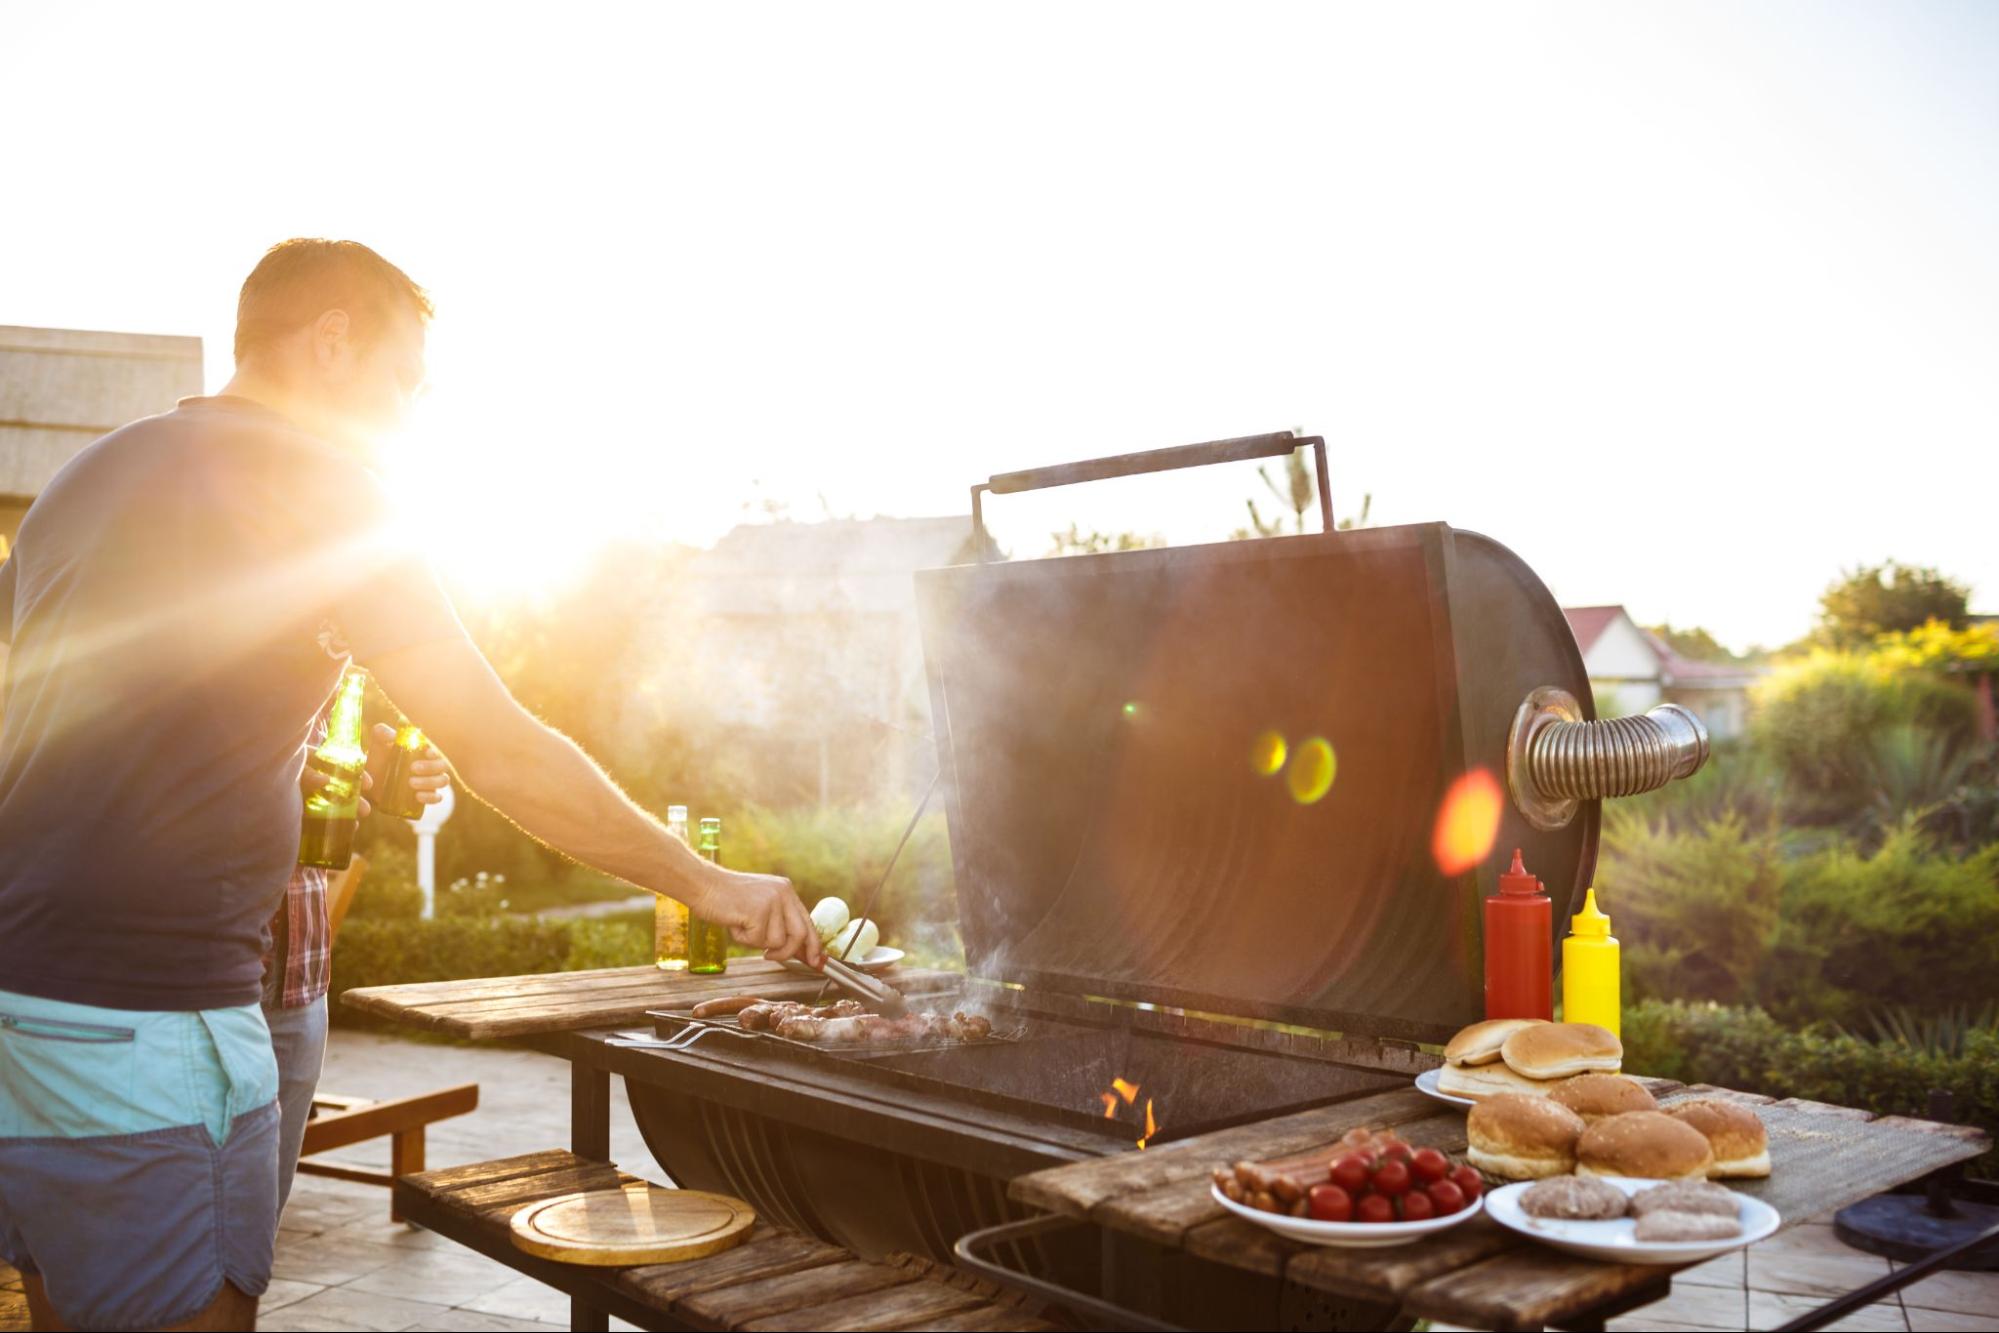 Grilling is a great way to enjoy the outdoors while hosting.